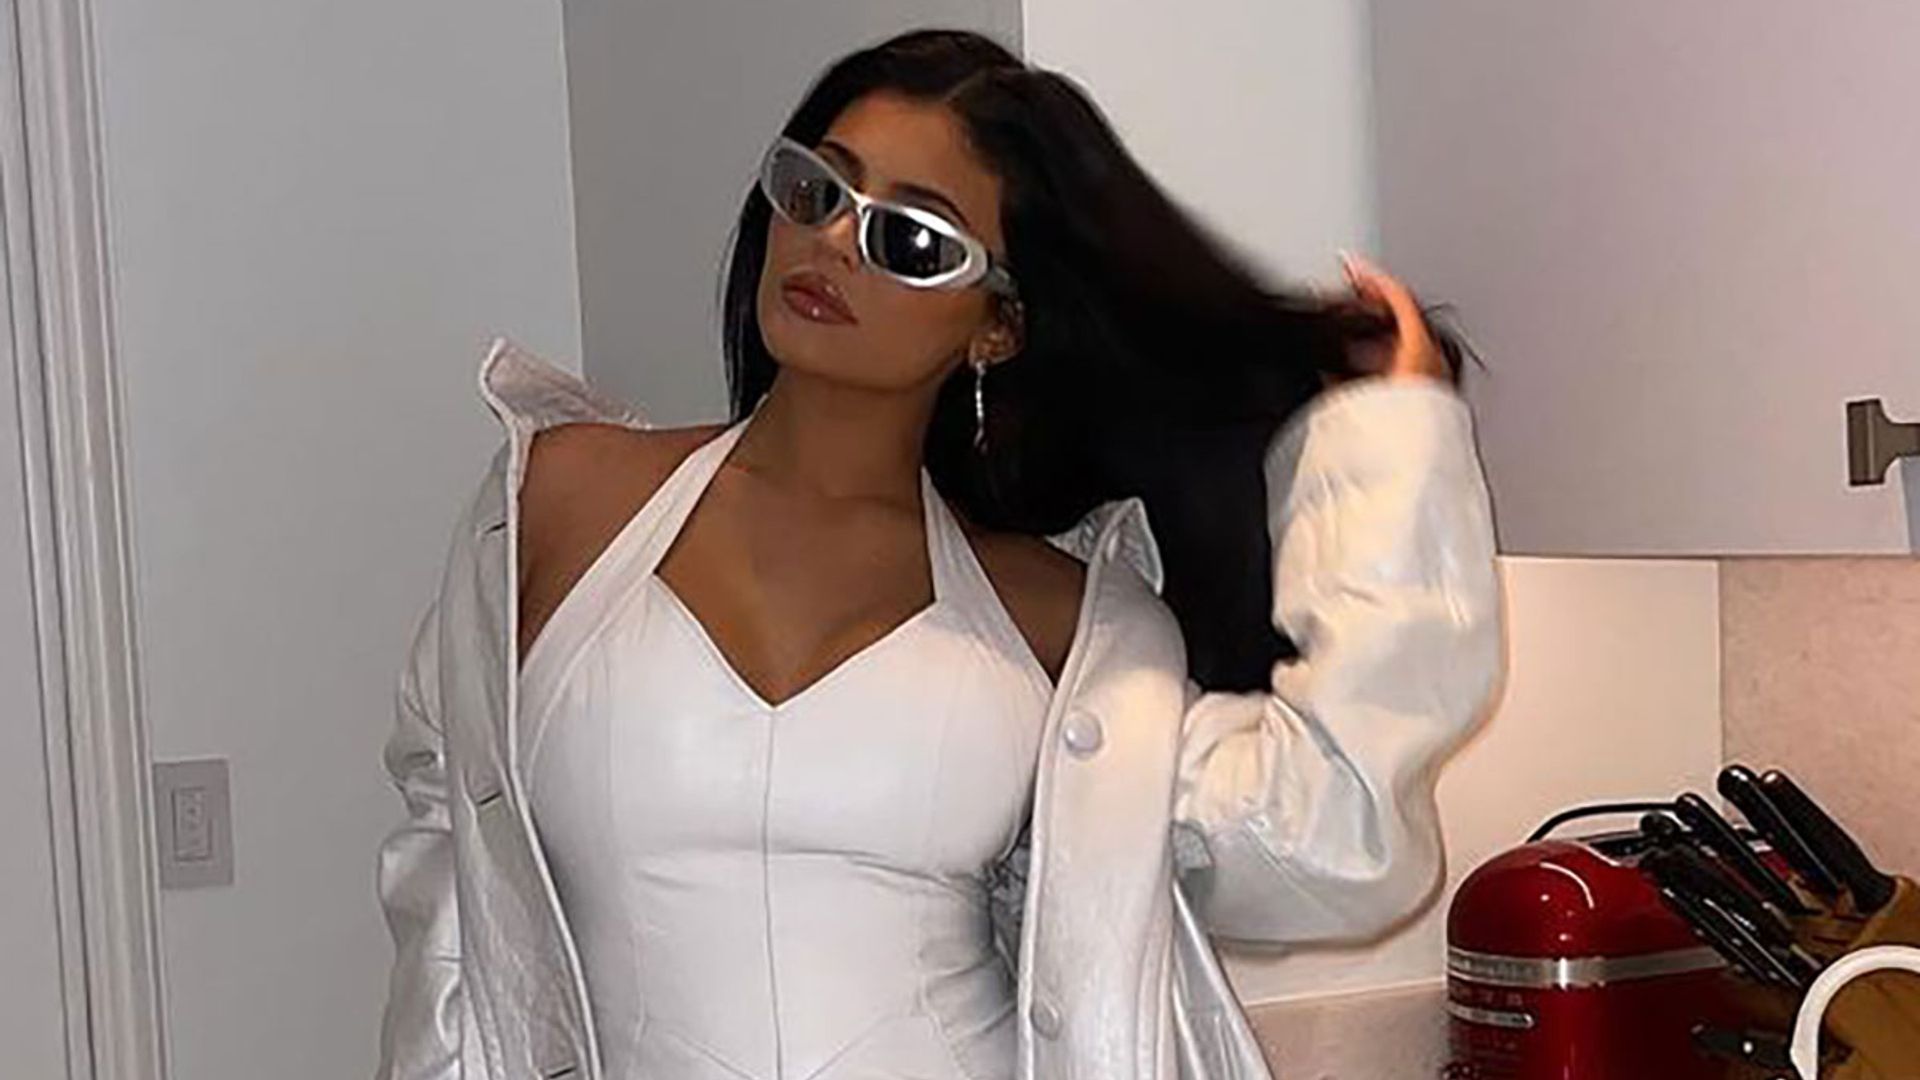 Kylie Jenner Outfits 2020: Here's How to Get Kylie's Instagram